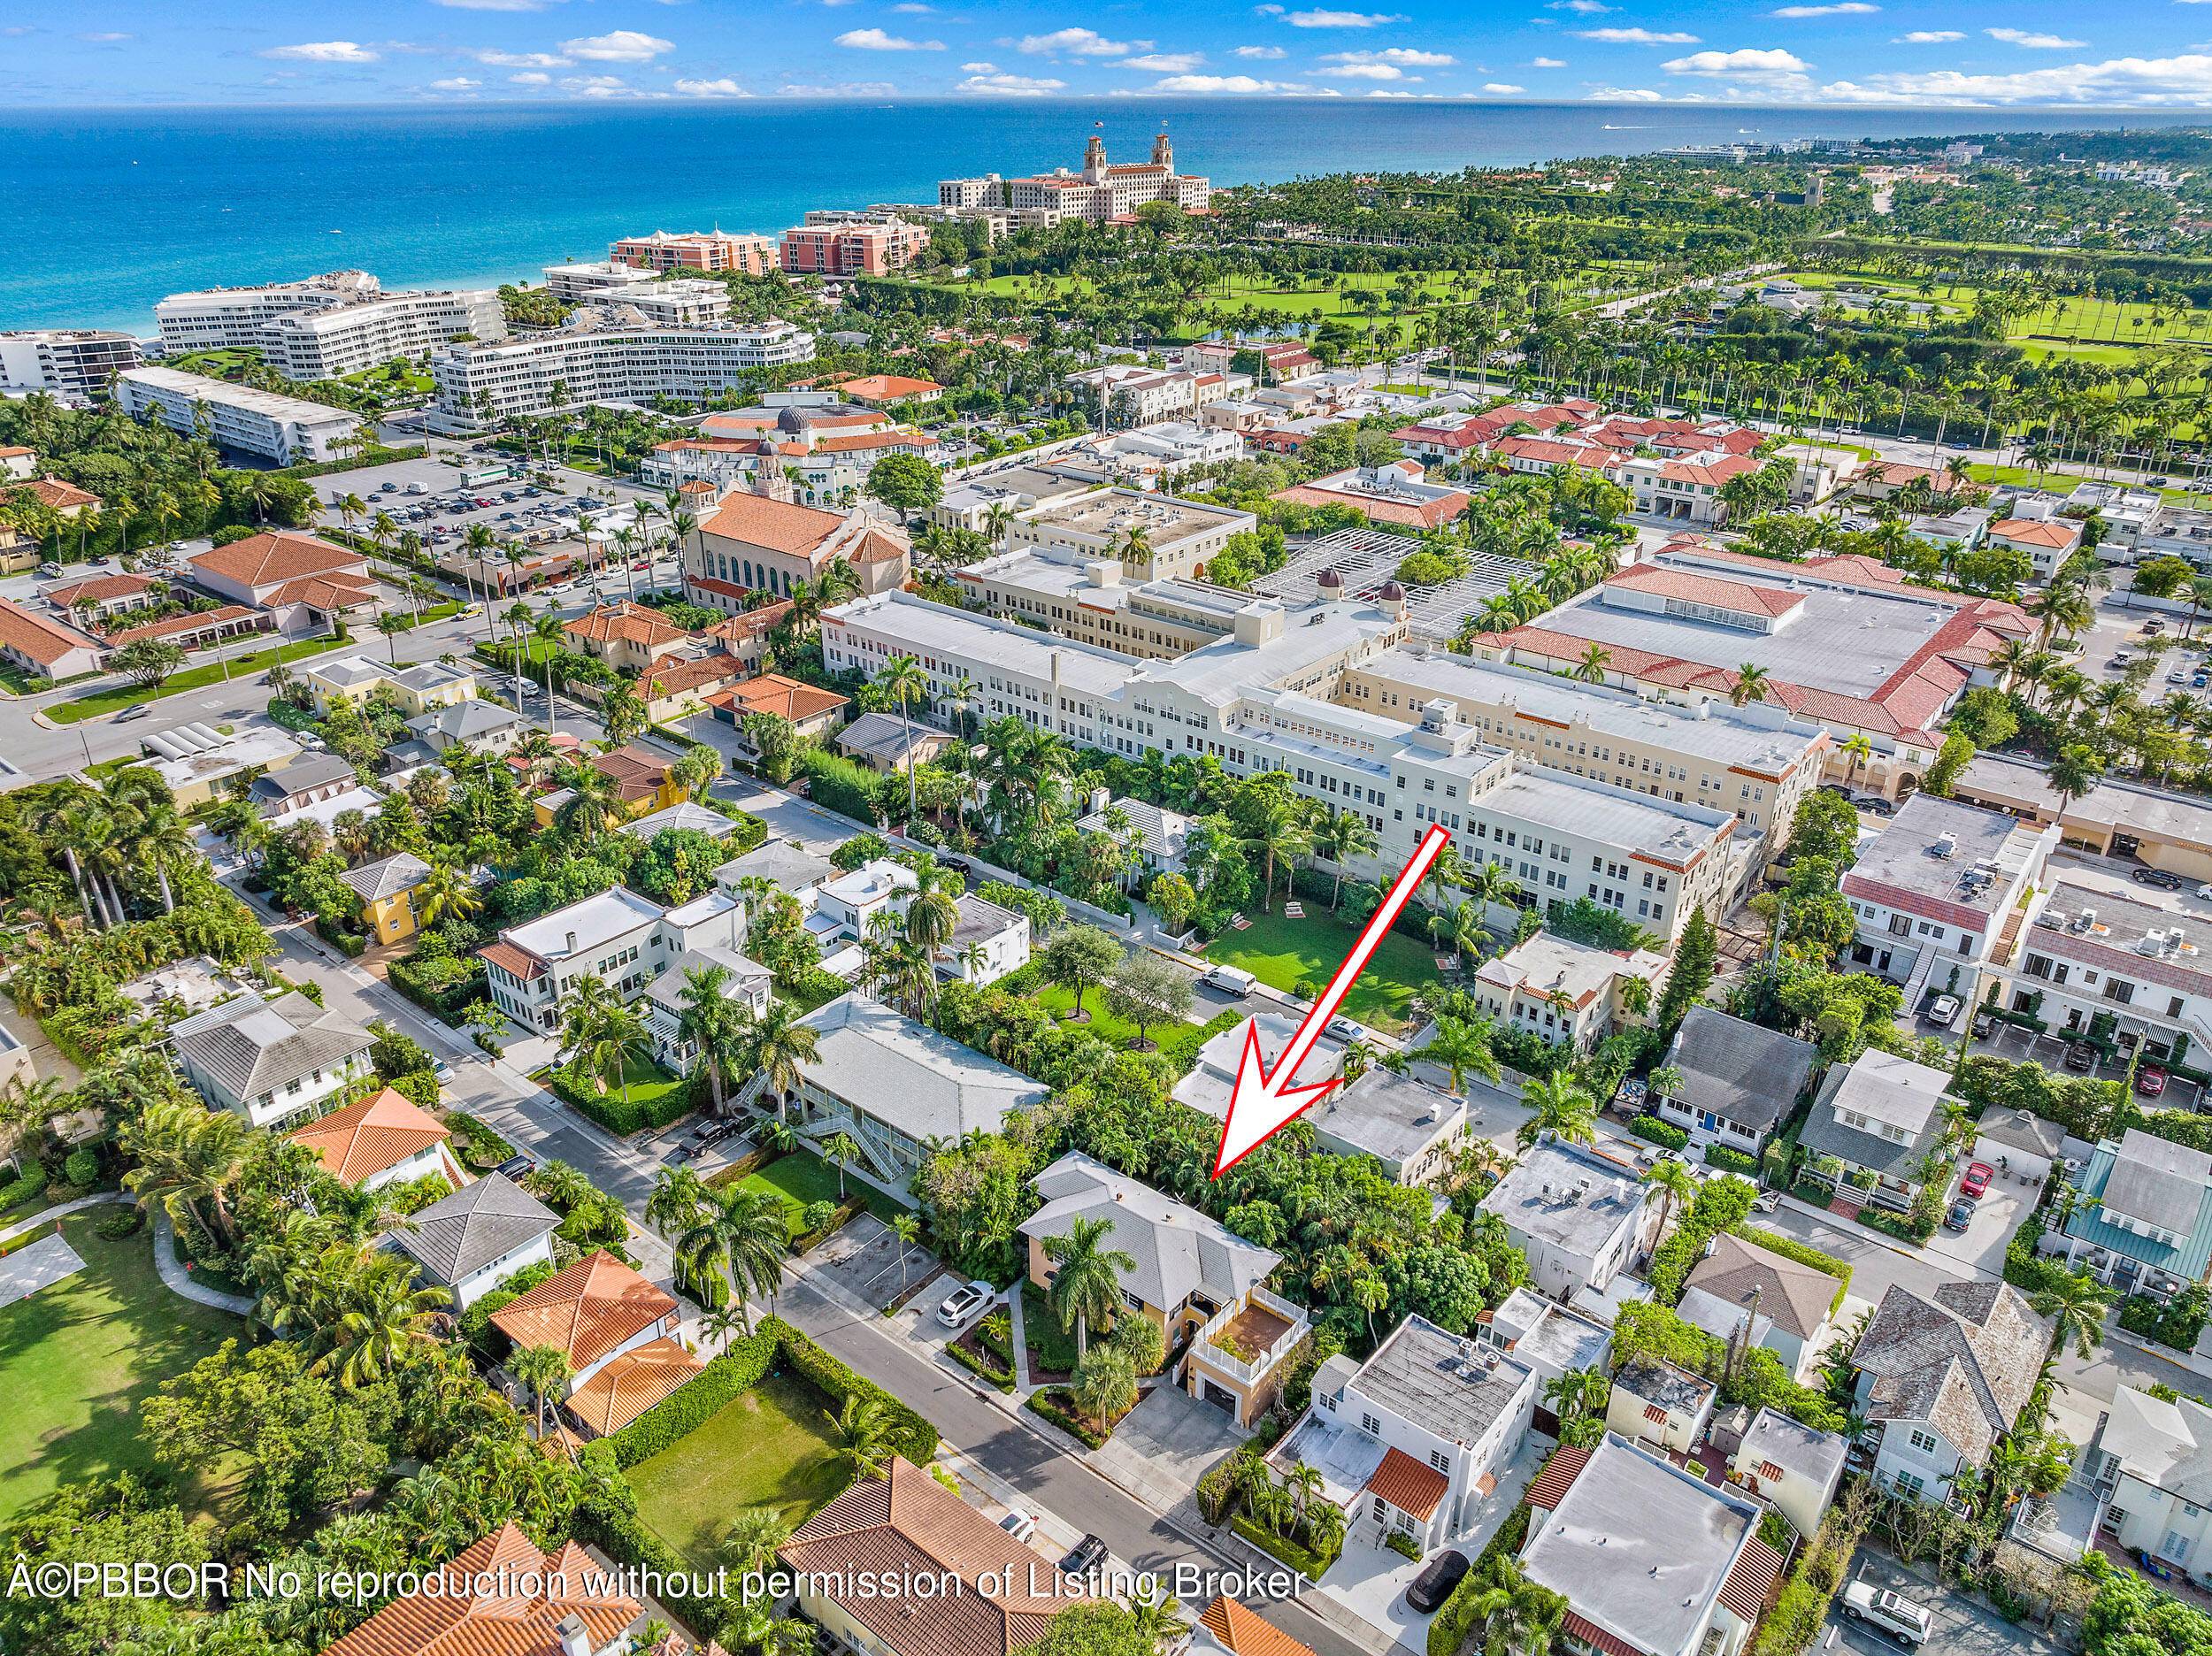 Rare Opportunity ! ! In the heart of Palm Beach Island this Triplex is situated on oversized lot with 5 off street parking spaces and Garage.